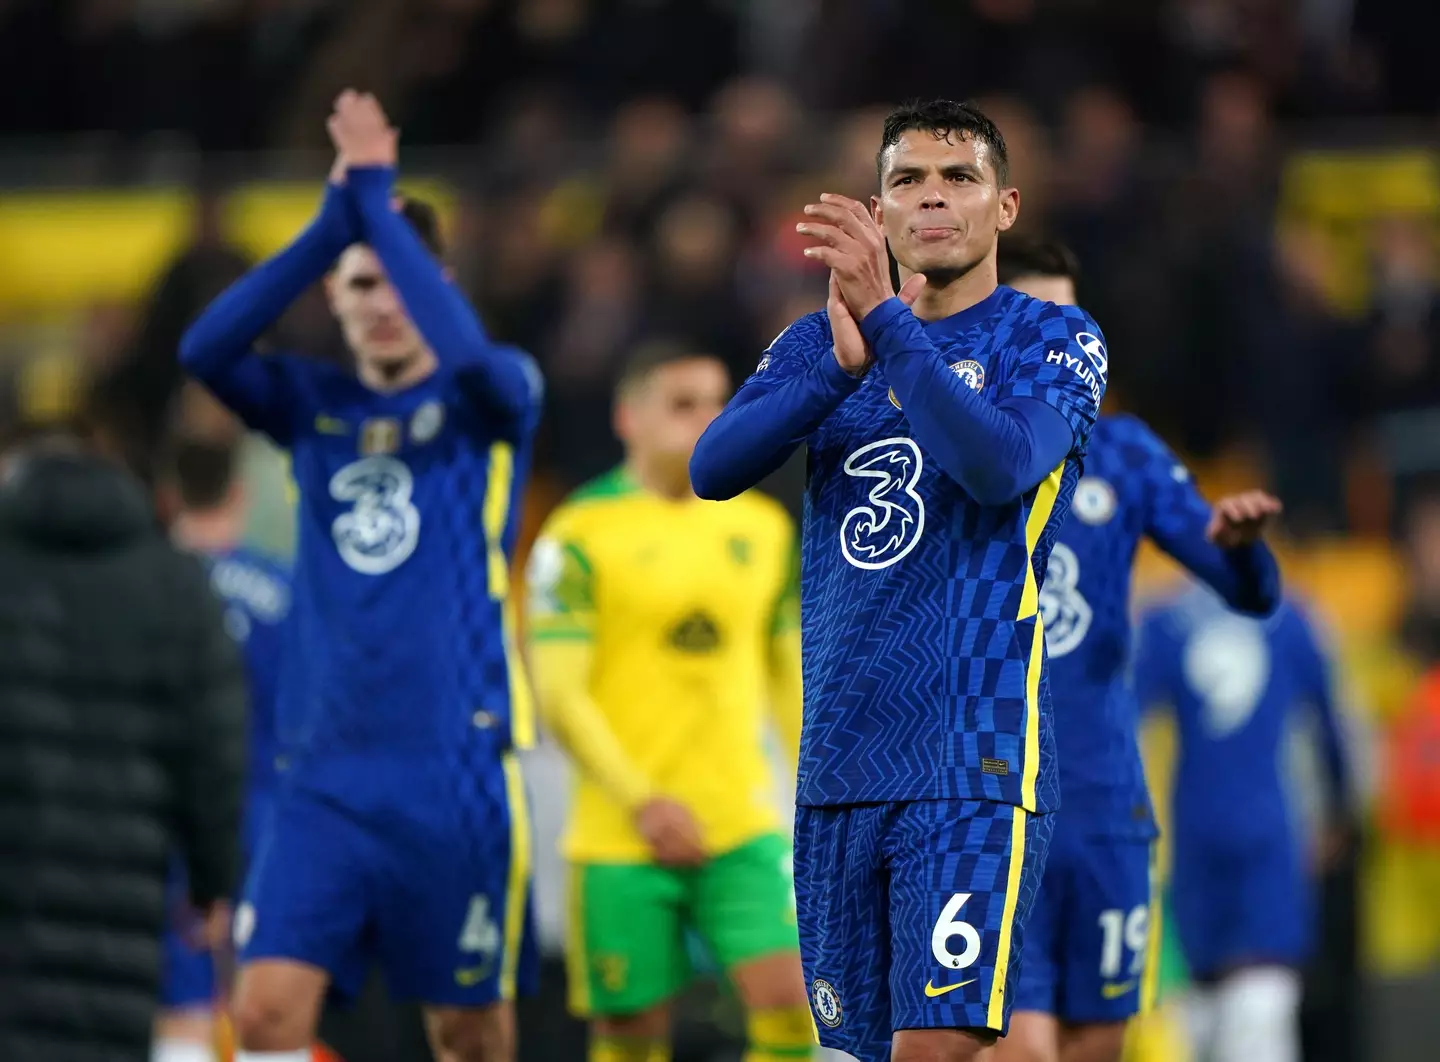 Chelsea players clap their fans, after beating Norwich City on Thursday. Image: PA Images